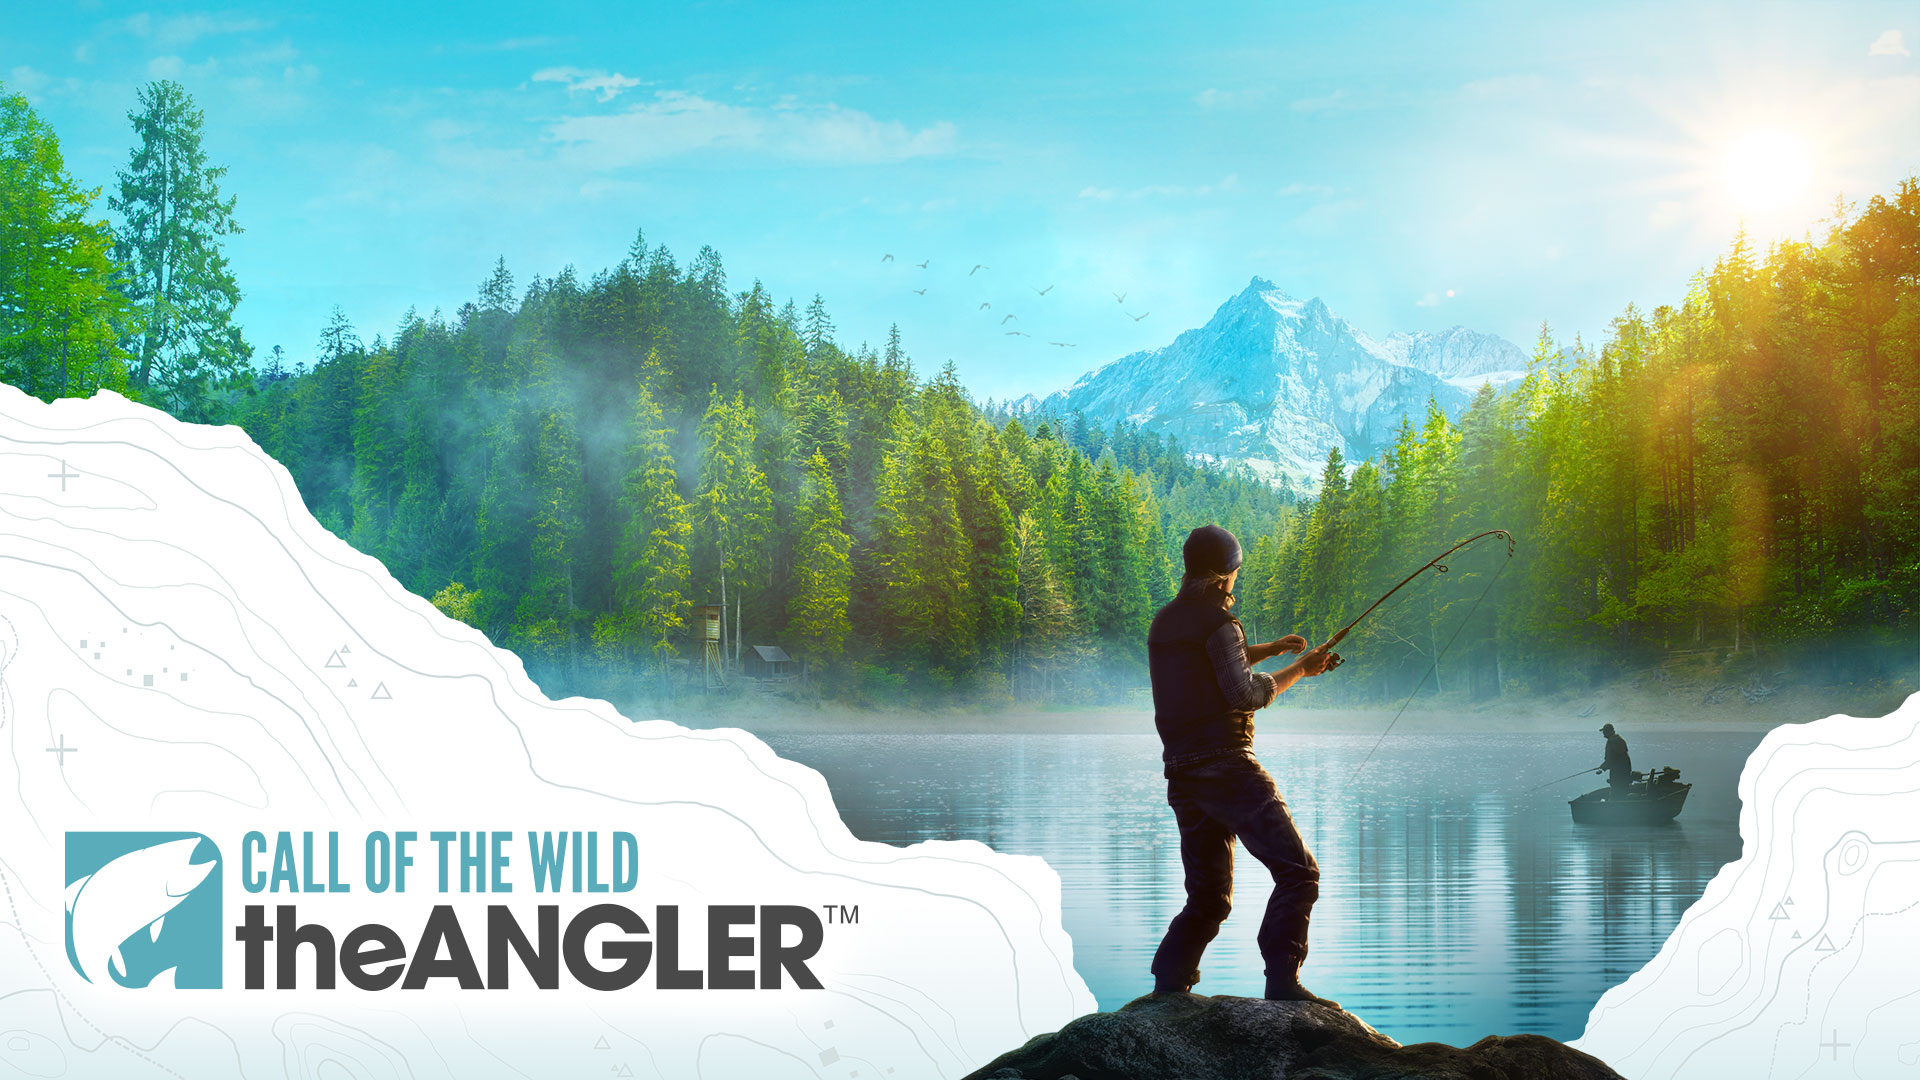 Free Play Days – Just Die Already, Moving Out 2, Call of the Wild: The  Angler and Chivalry 2 - Xbox Wire